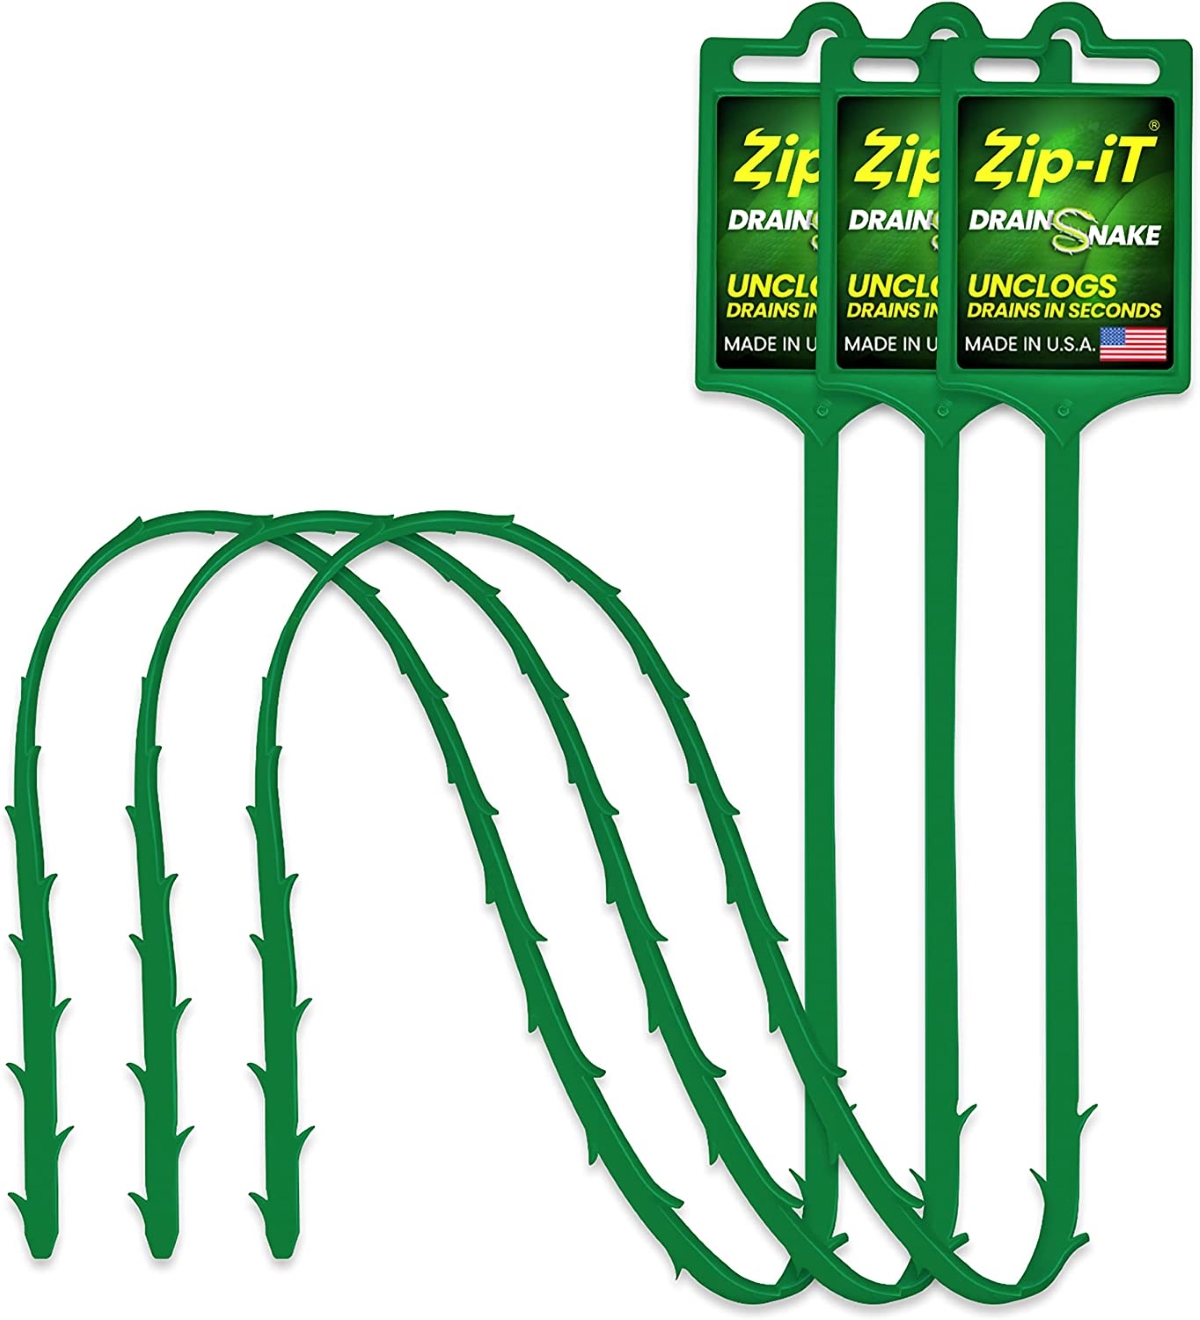 ways to clean behind and under every appliance - three green drain zip tools